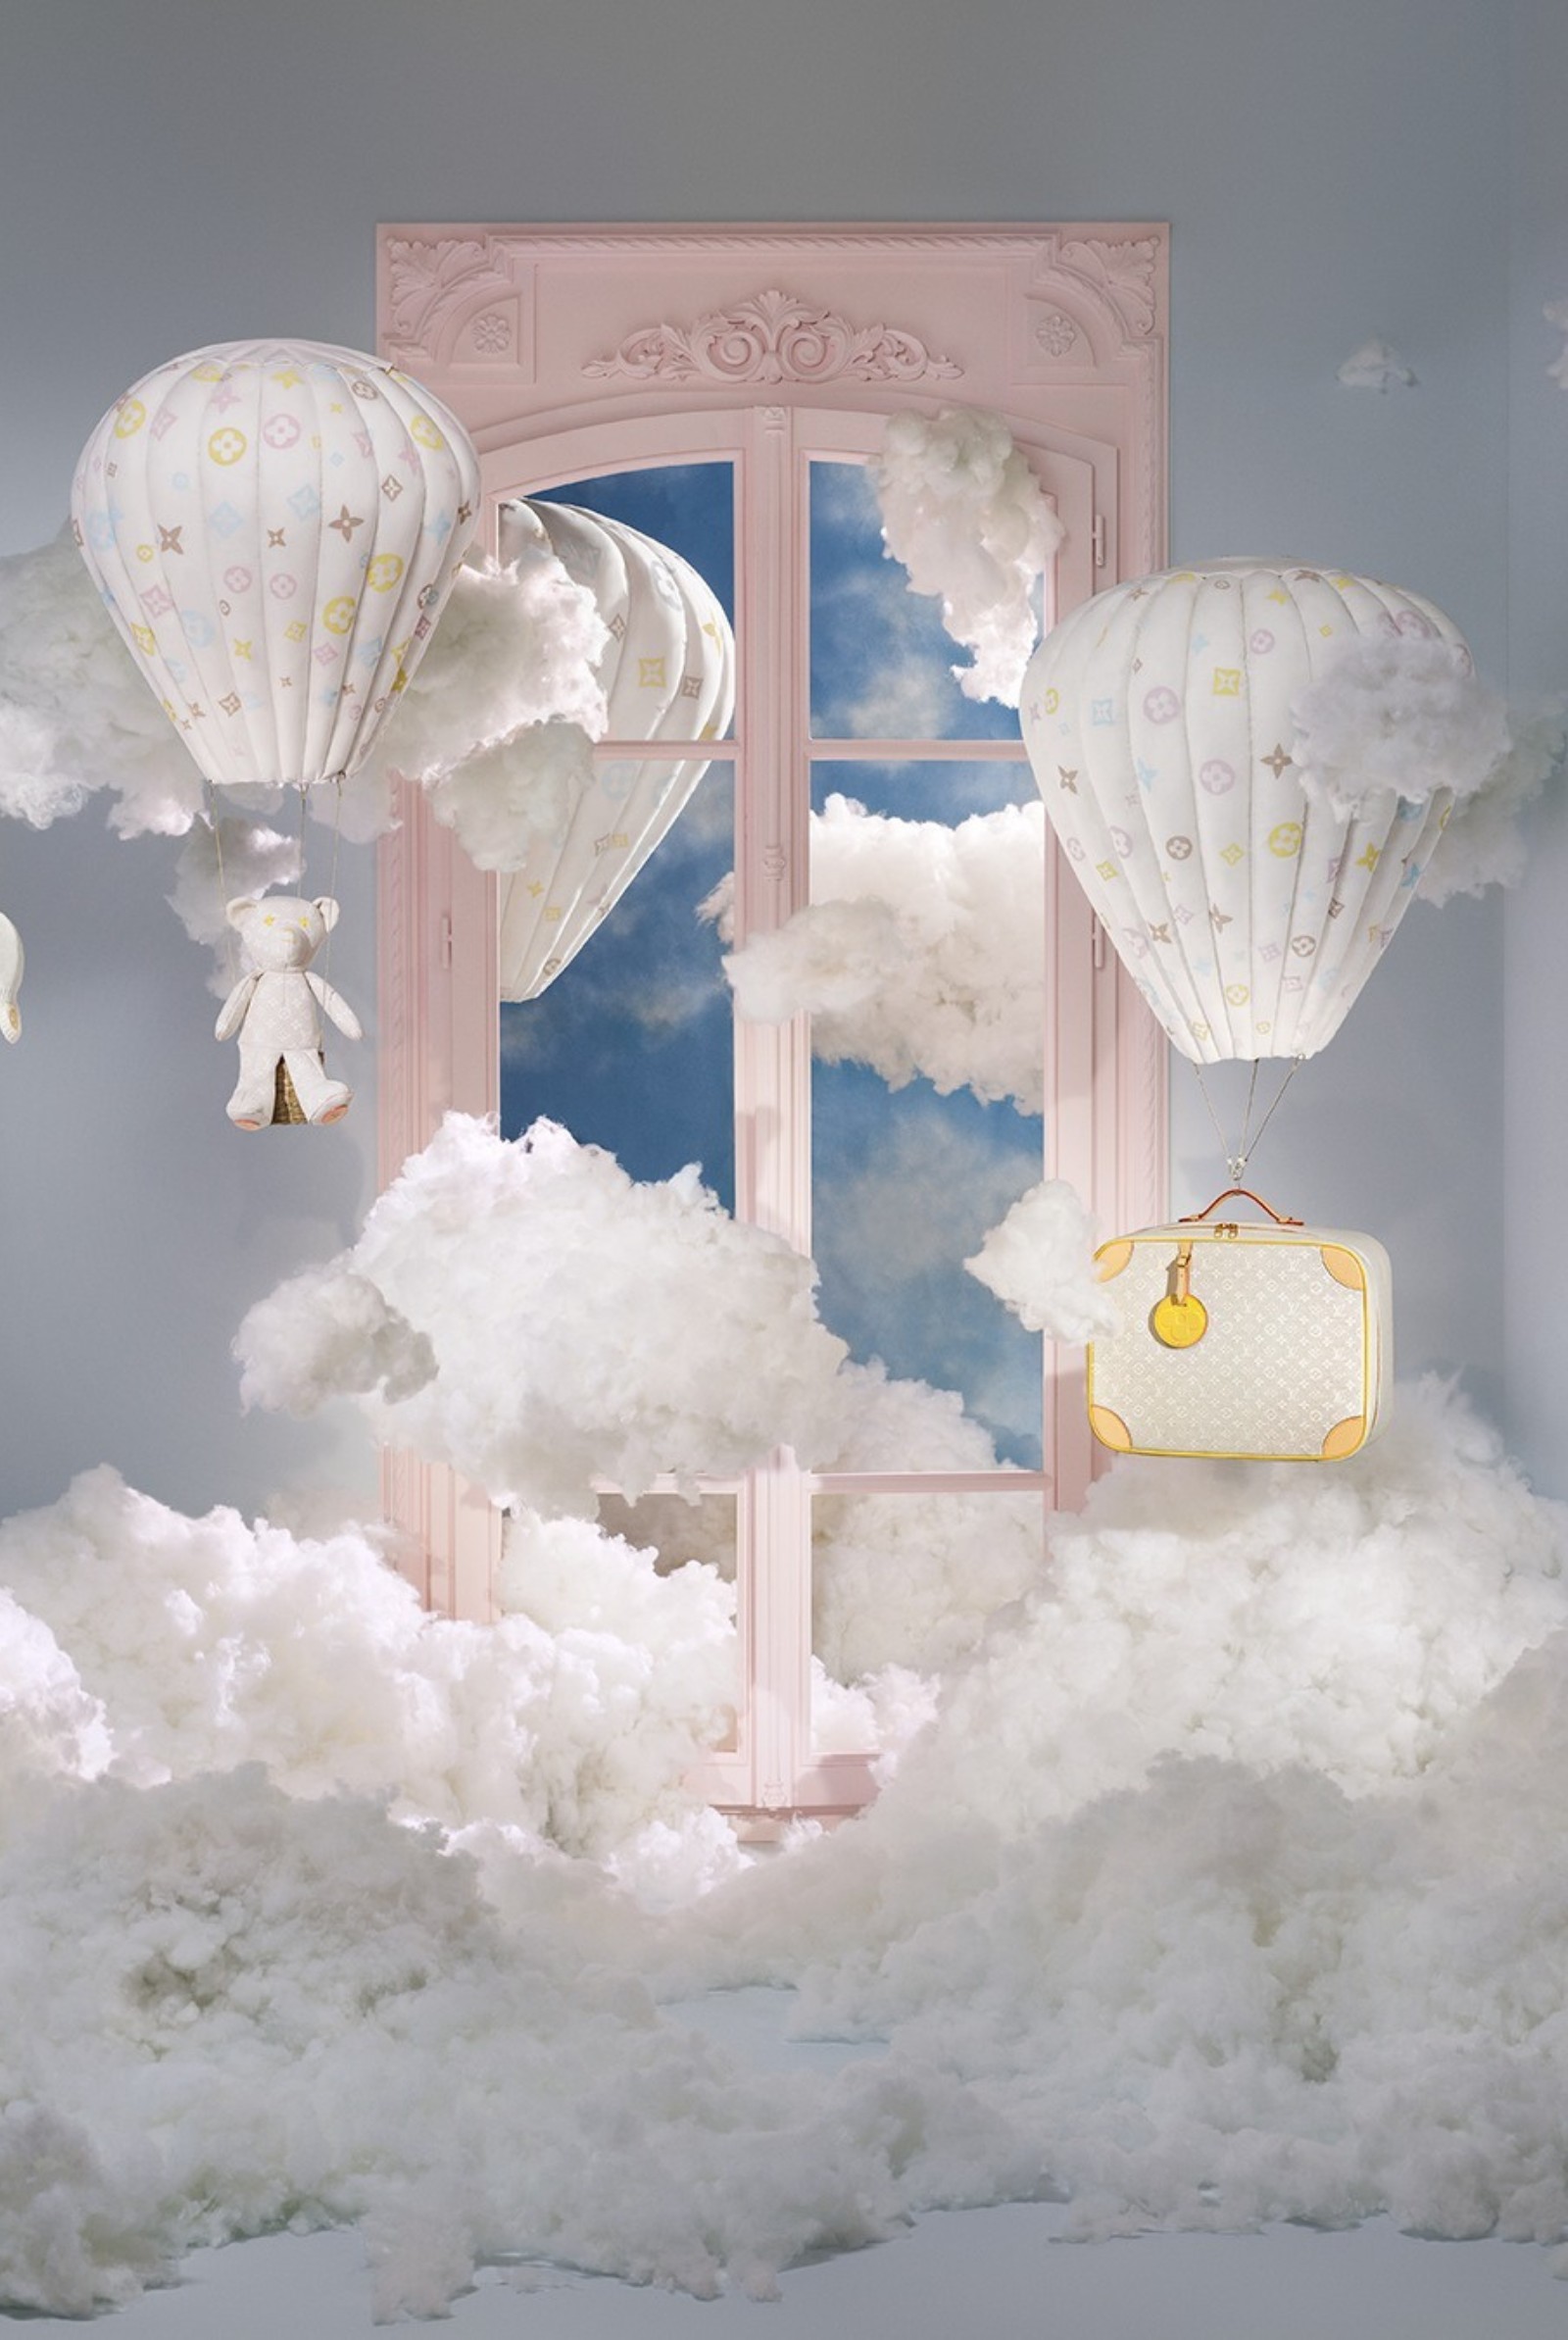 Louis Vuitton Reveals Its First Baby Collection - A&E Magazine